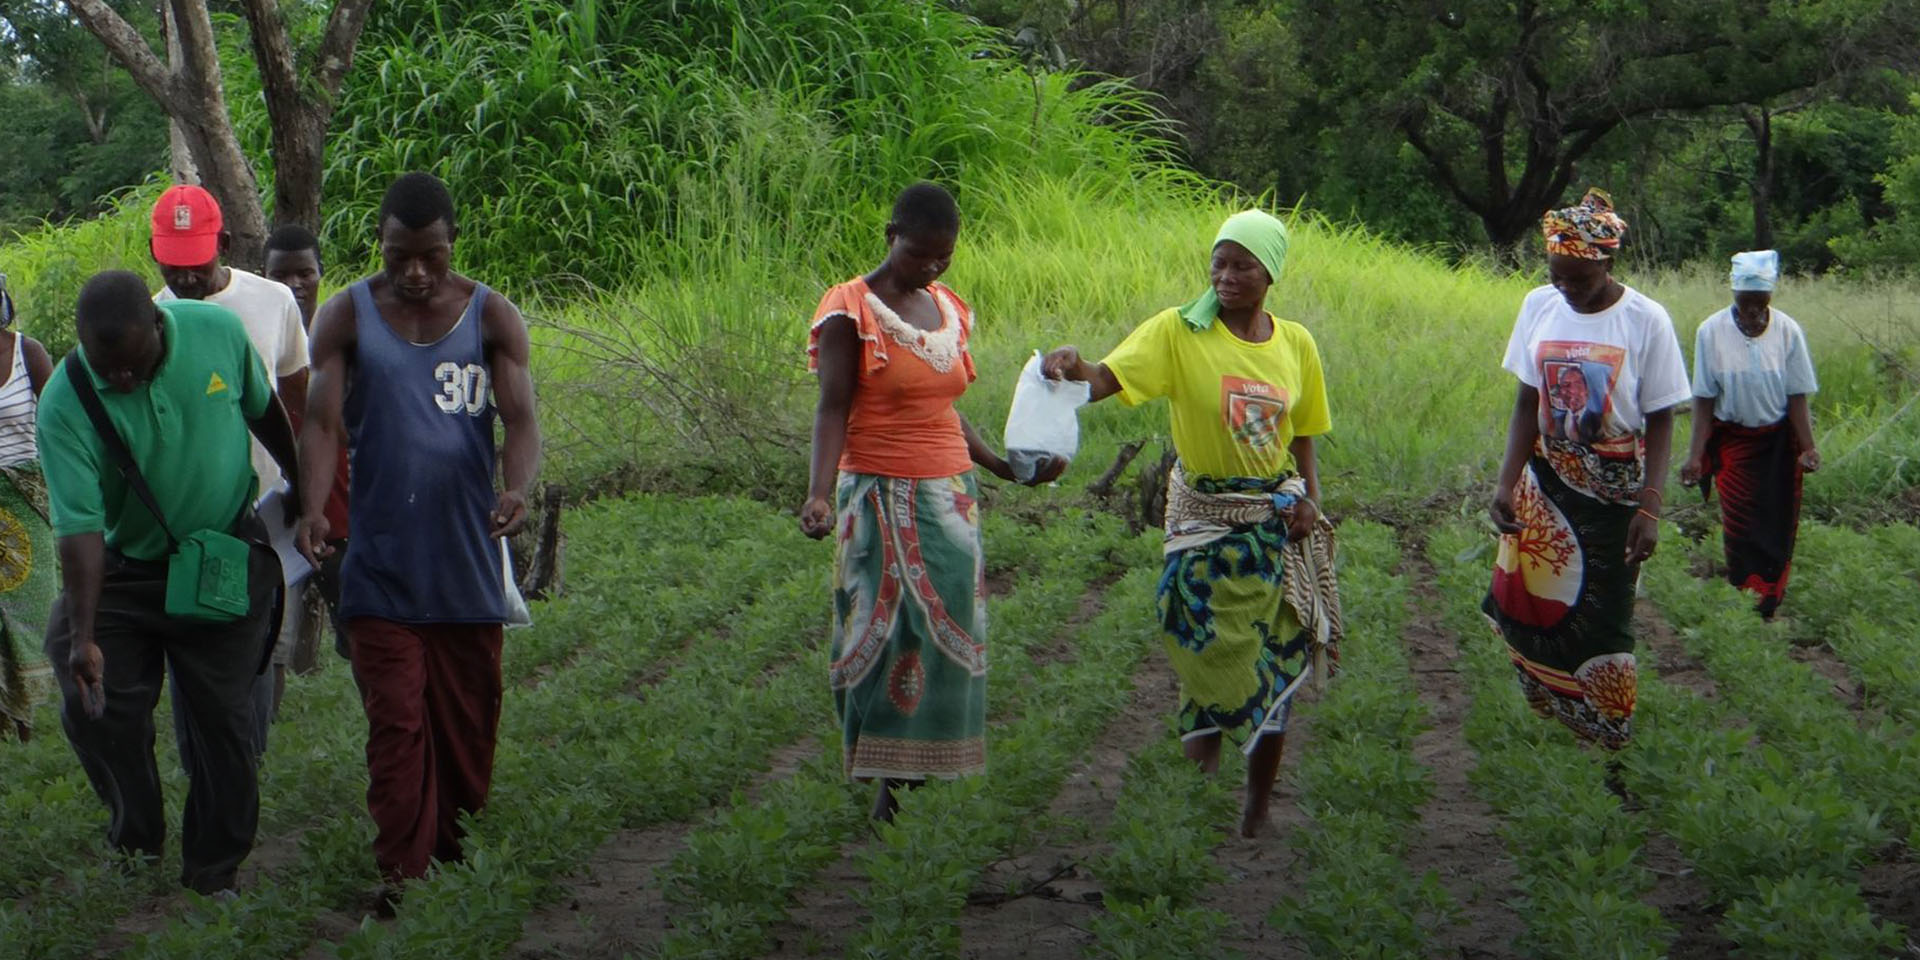 A group of people walking amongst crops and spreading fertilizer.